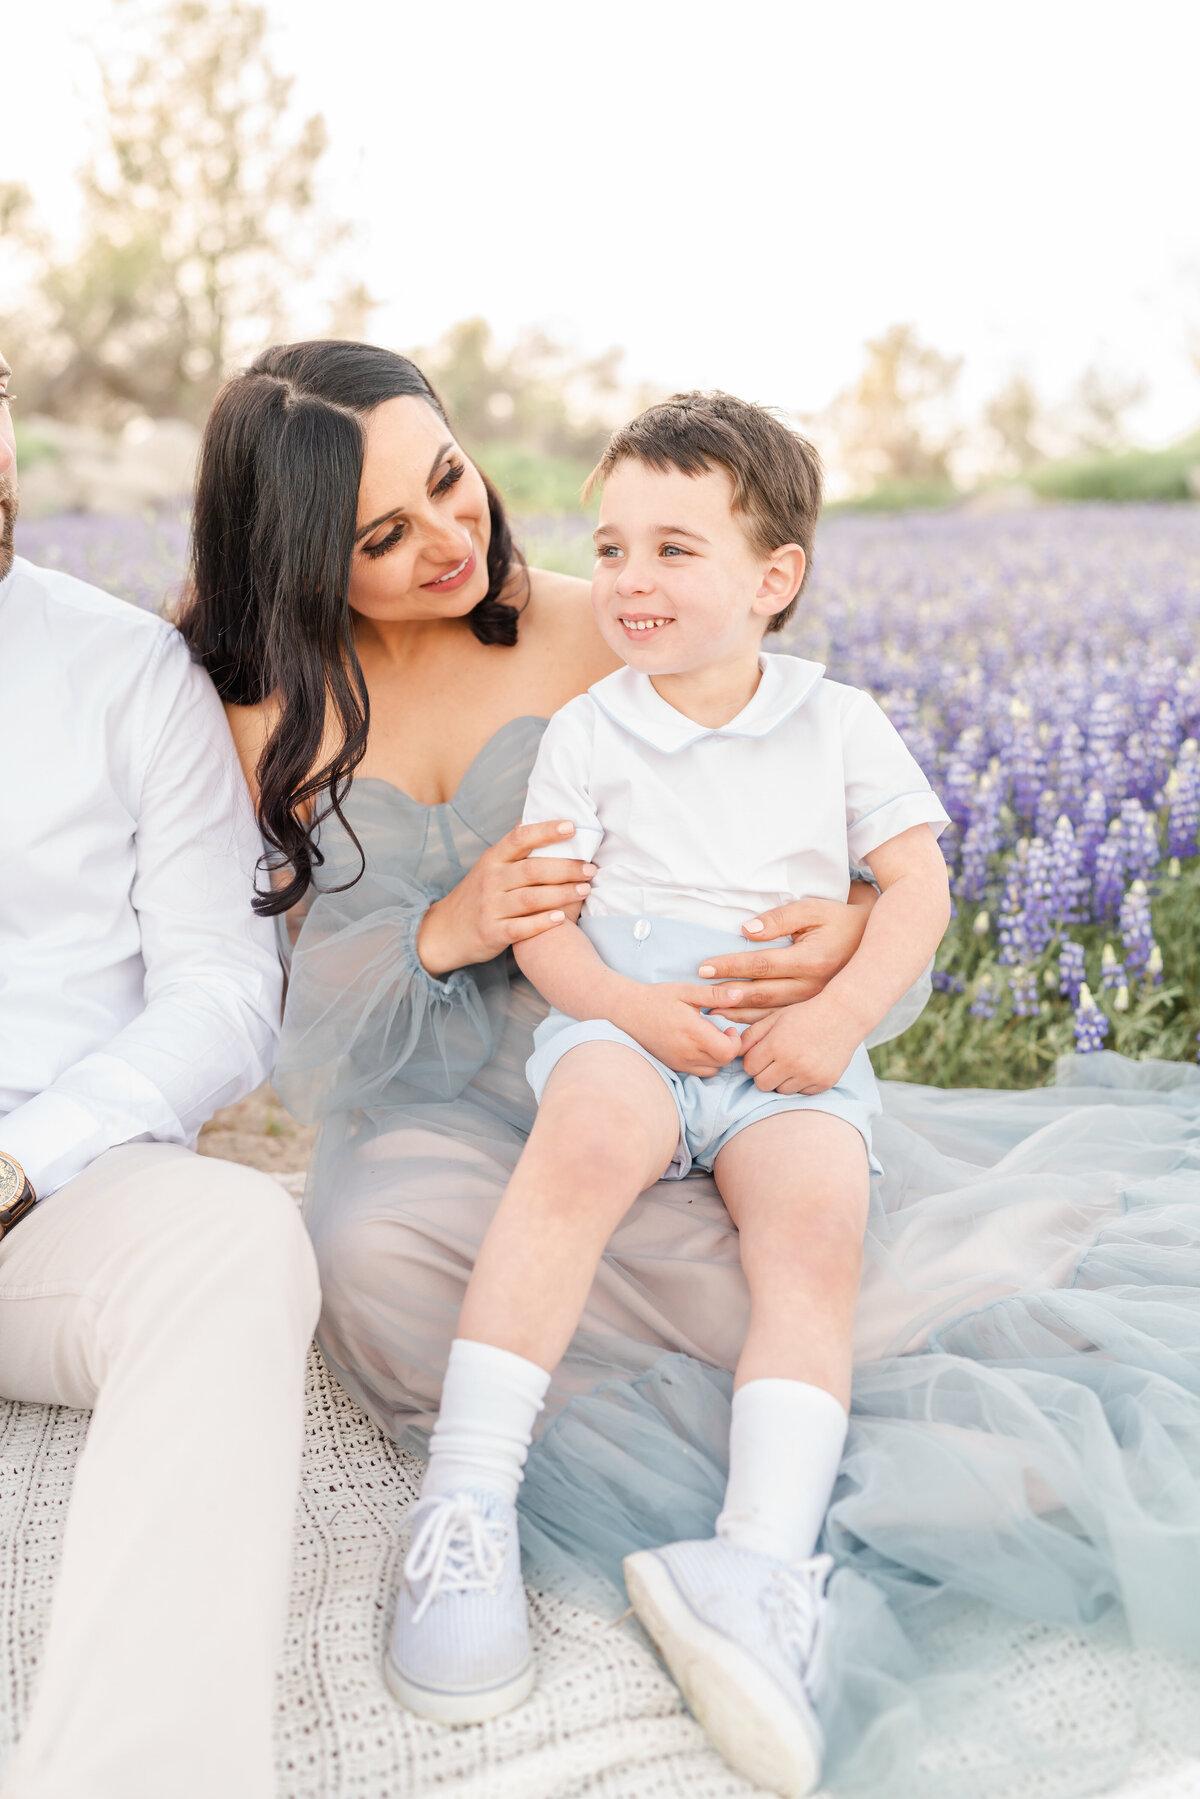 A mother and son sit together in a field of lupines while the mother looks lovingly at her son who is smiling photographed by bay area photographer, Light Livin Photography.